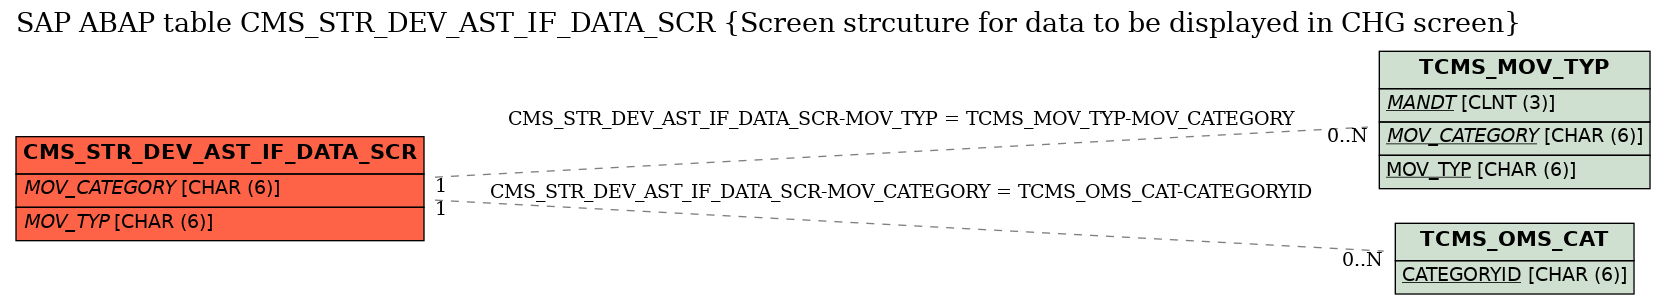 E-R Diagram for table CMS_STR_DEV_AST_IF_DATA_SCR (Screen strcuture for data to be displayed in CHG screen)